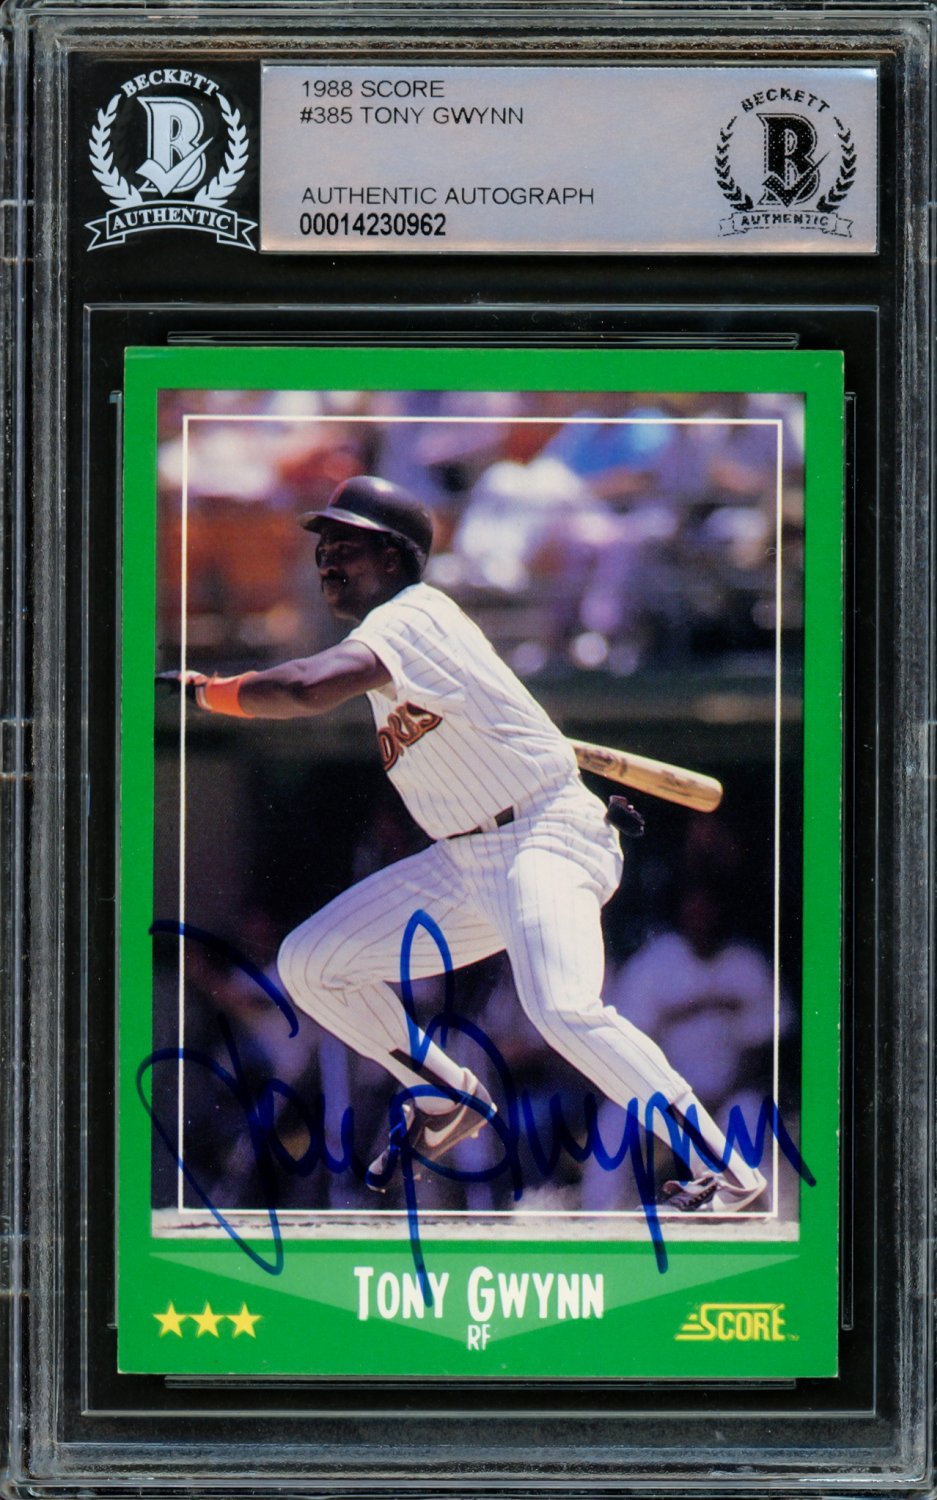 Tony Gwynn Signed 1988 Score #385 Baseball Card Padres HOF Autograph  PSA/DNA - Baseball Slabbed Autographed Cards at 's Sports  Collectibles Store